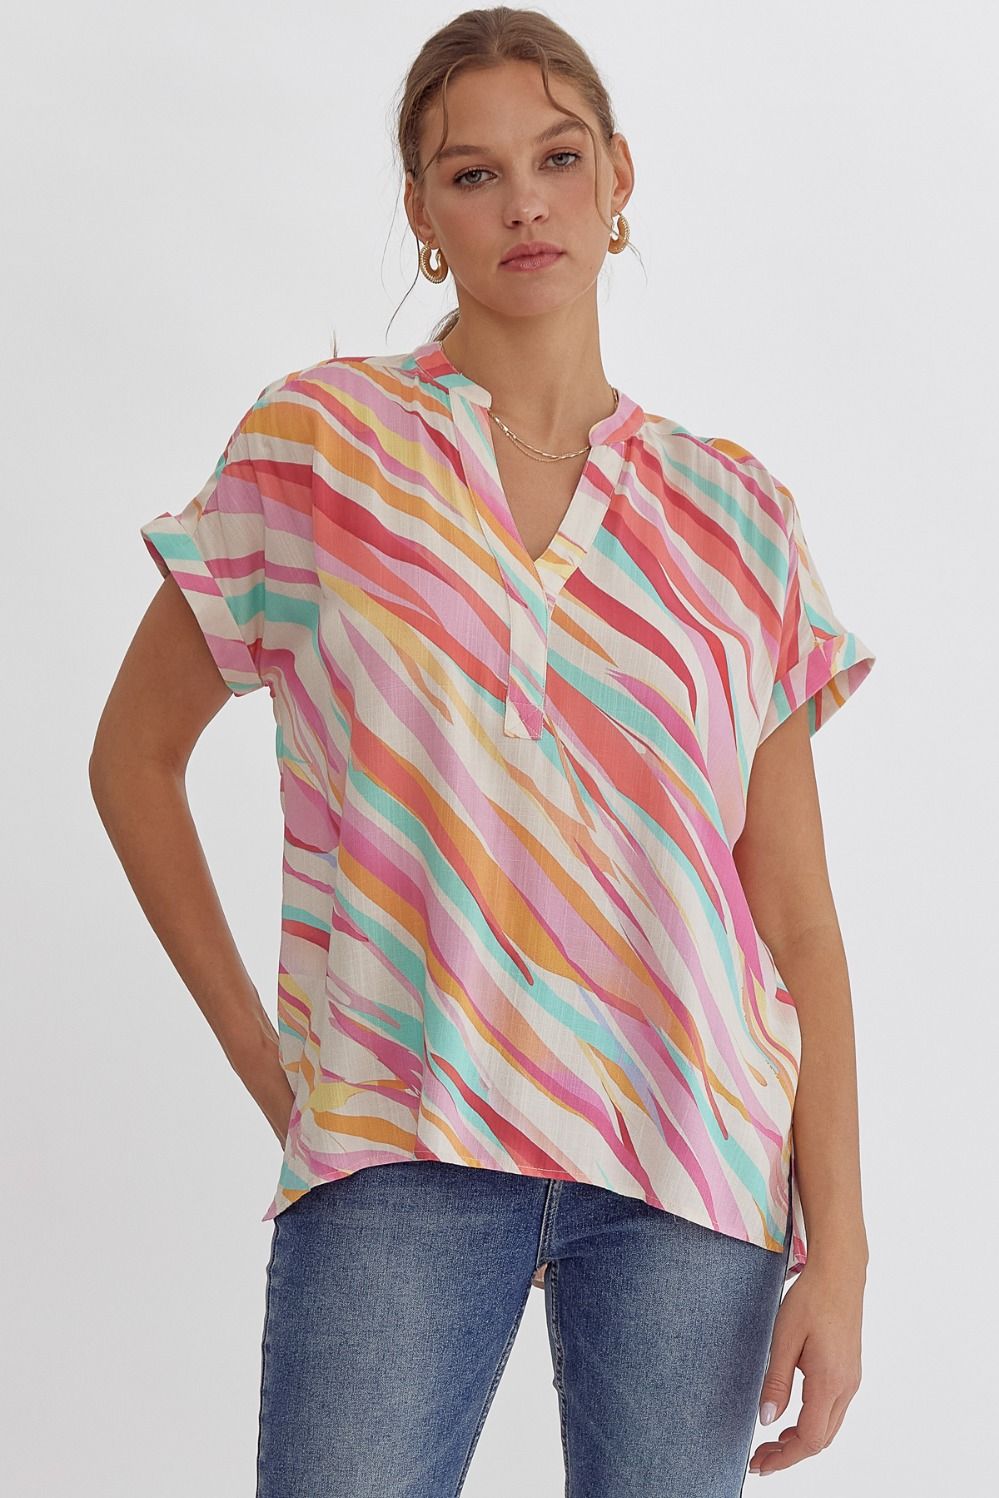 Printed v-neck short sleeve top featuring permanent rolled cuff. Placket detail at neckline.